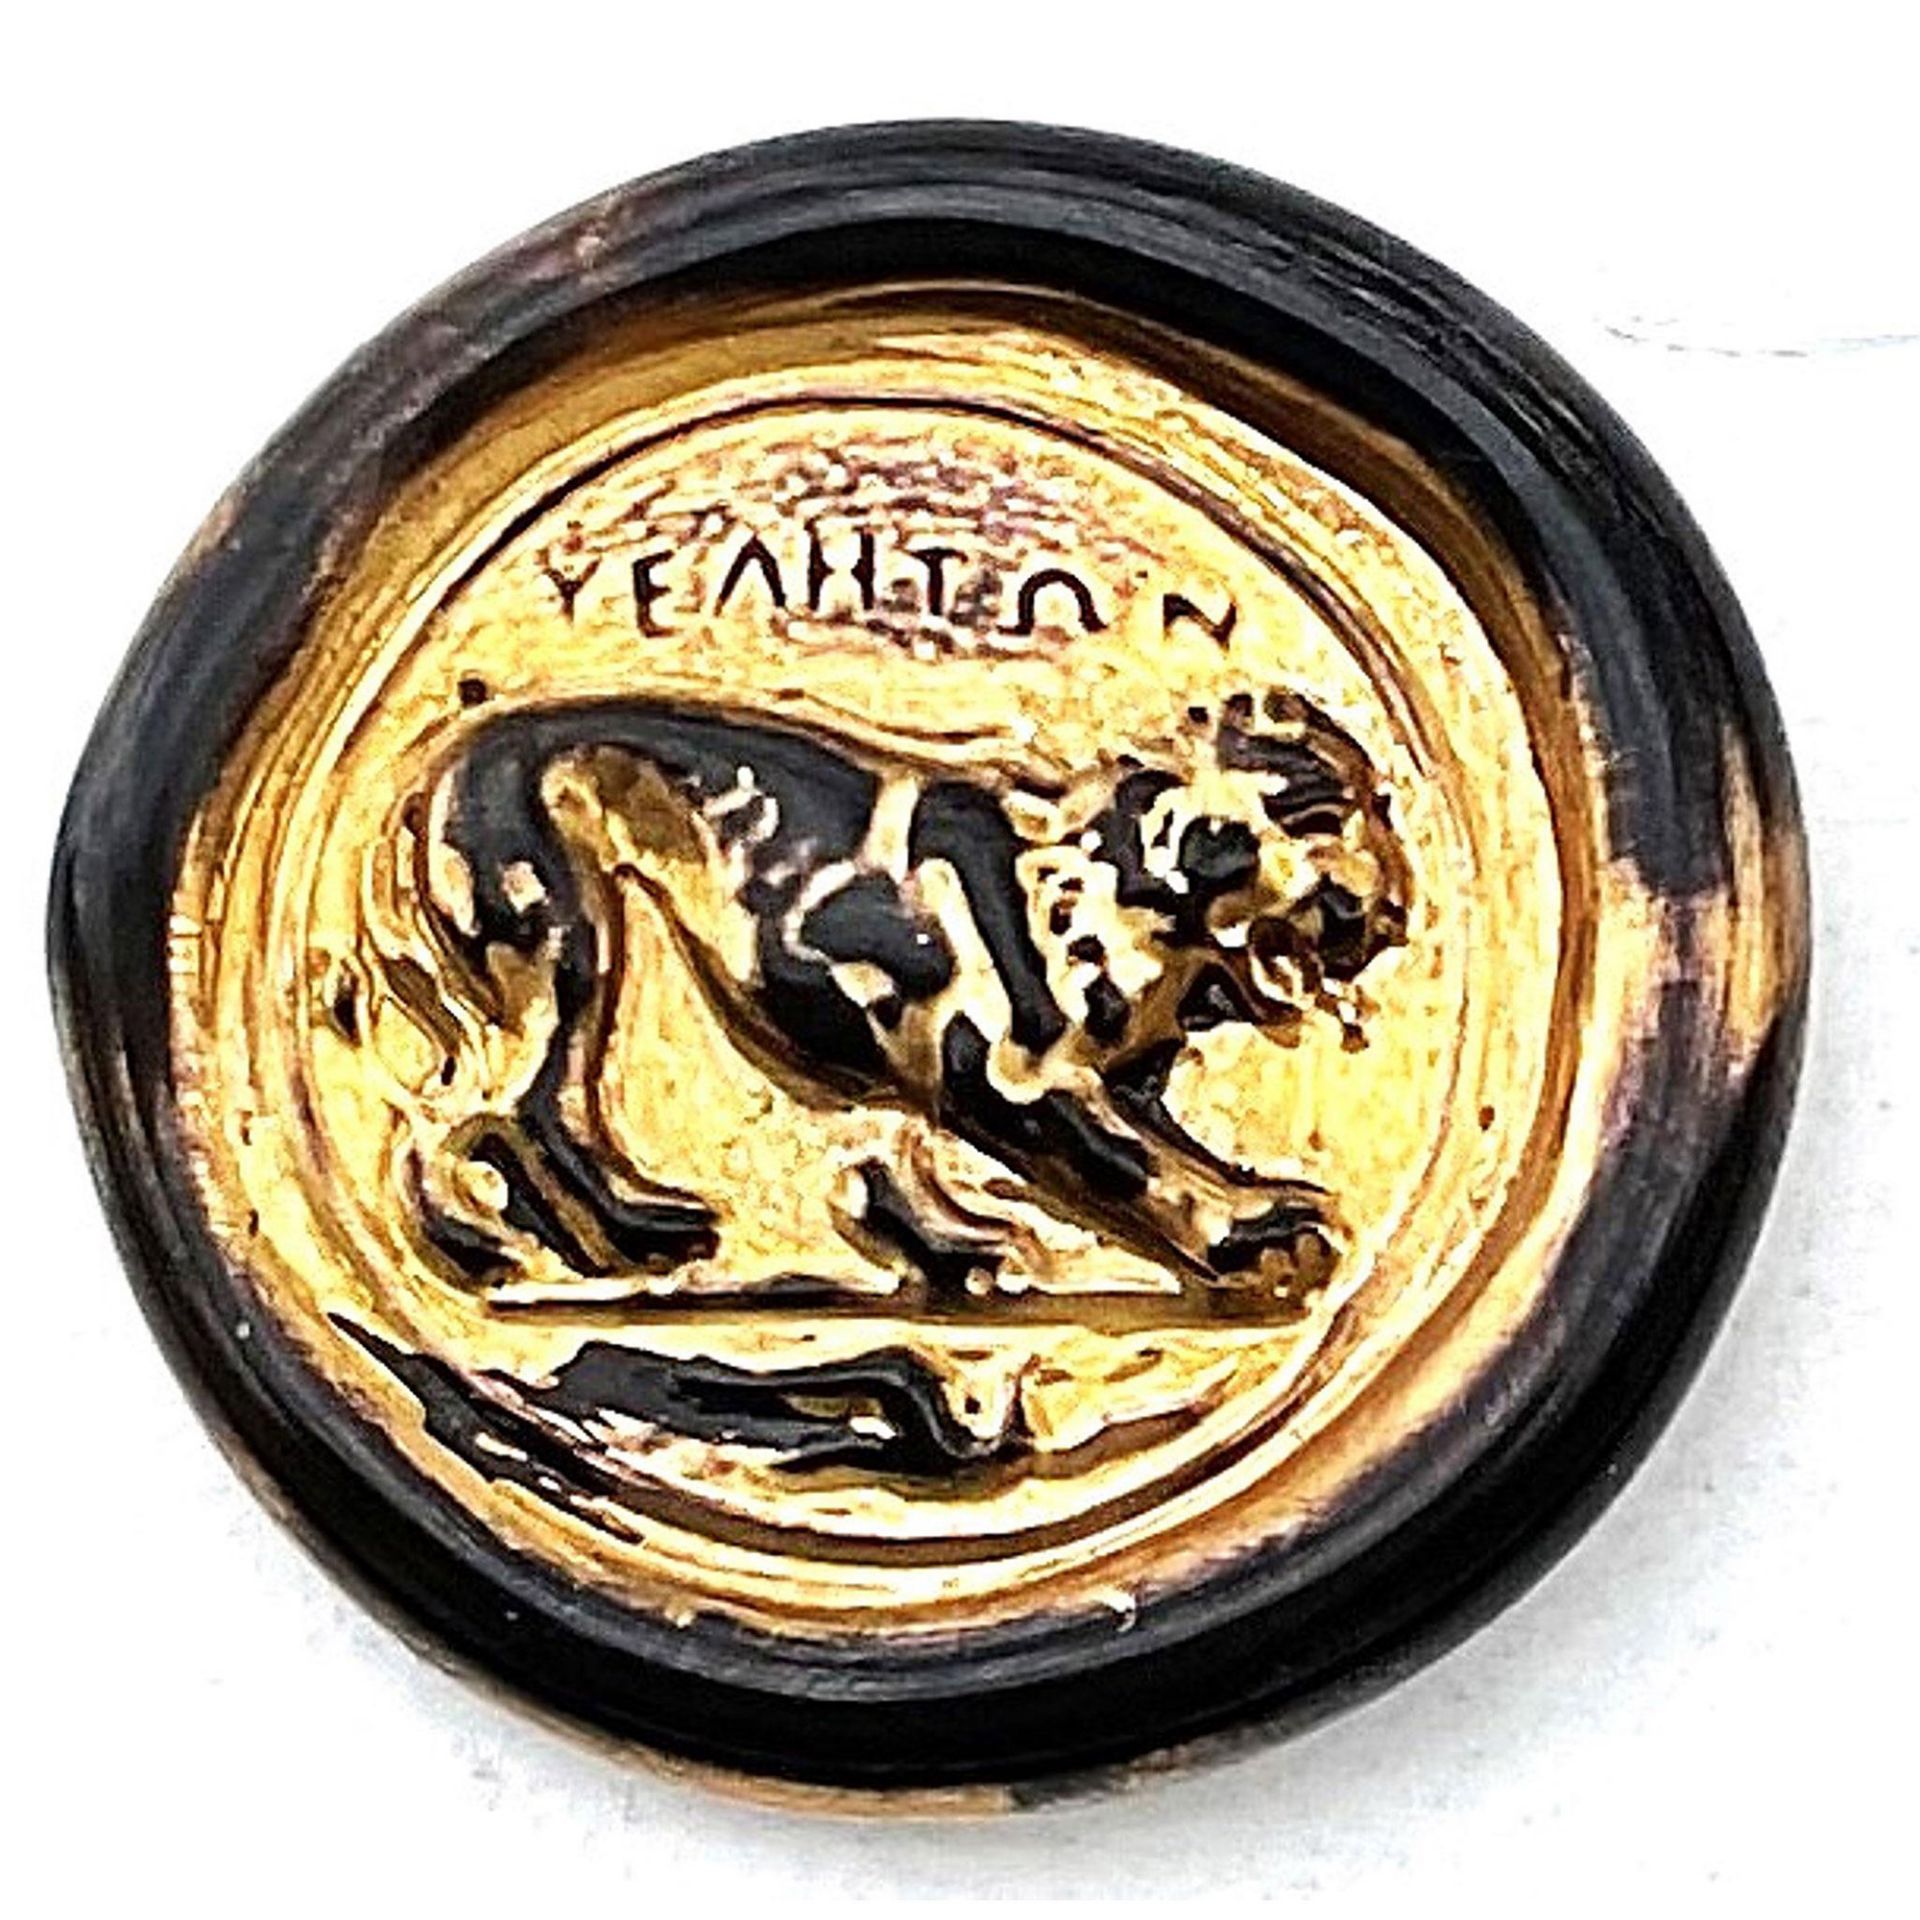 A division 3 backmarked Glass button from England